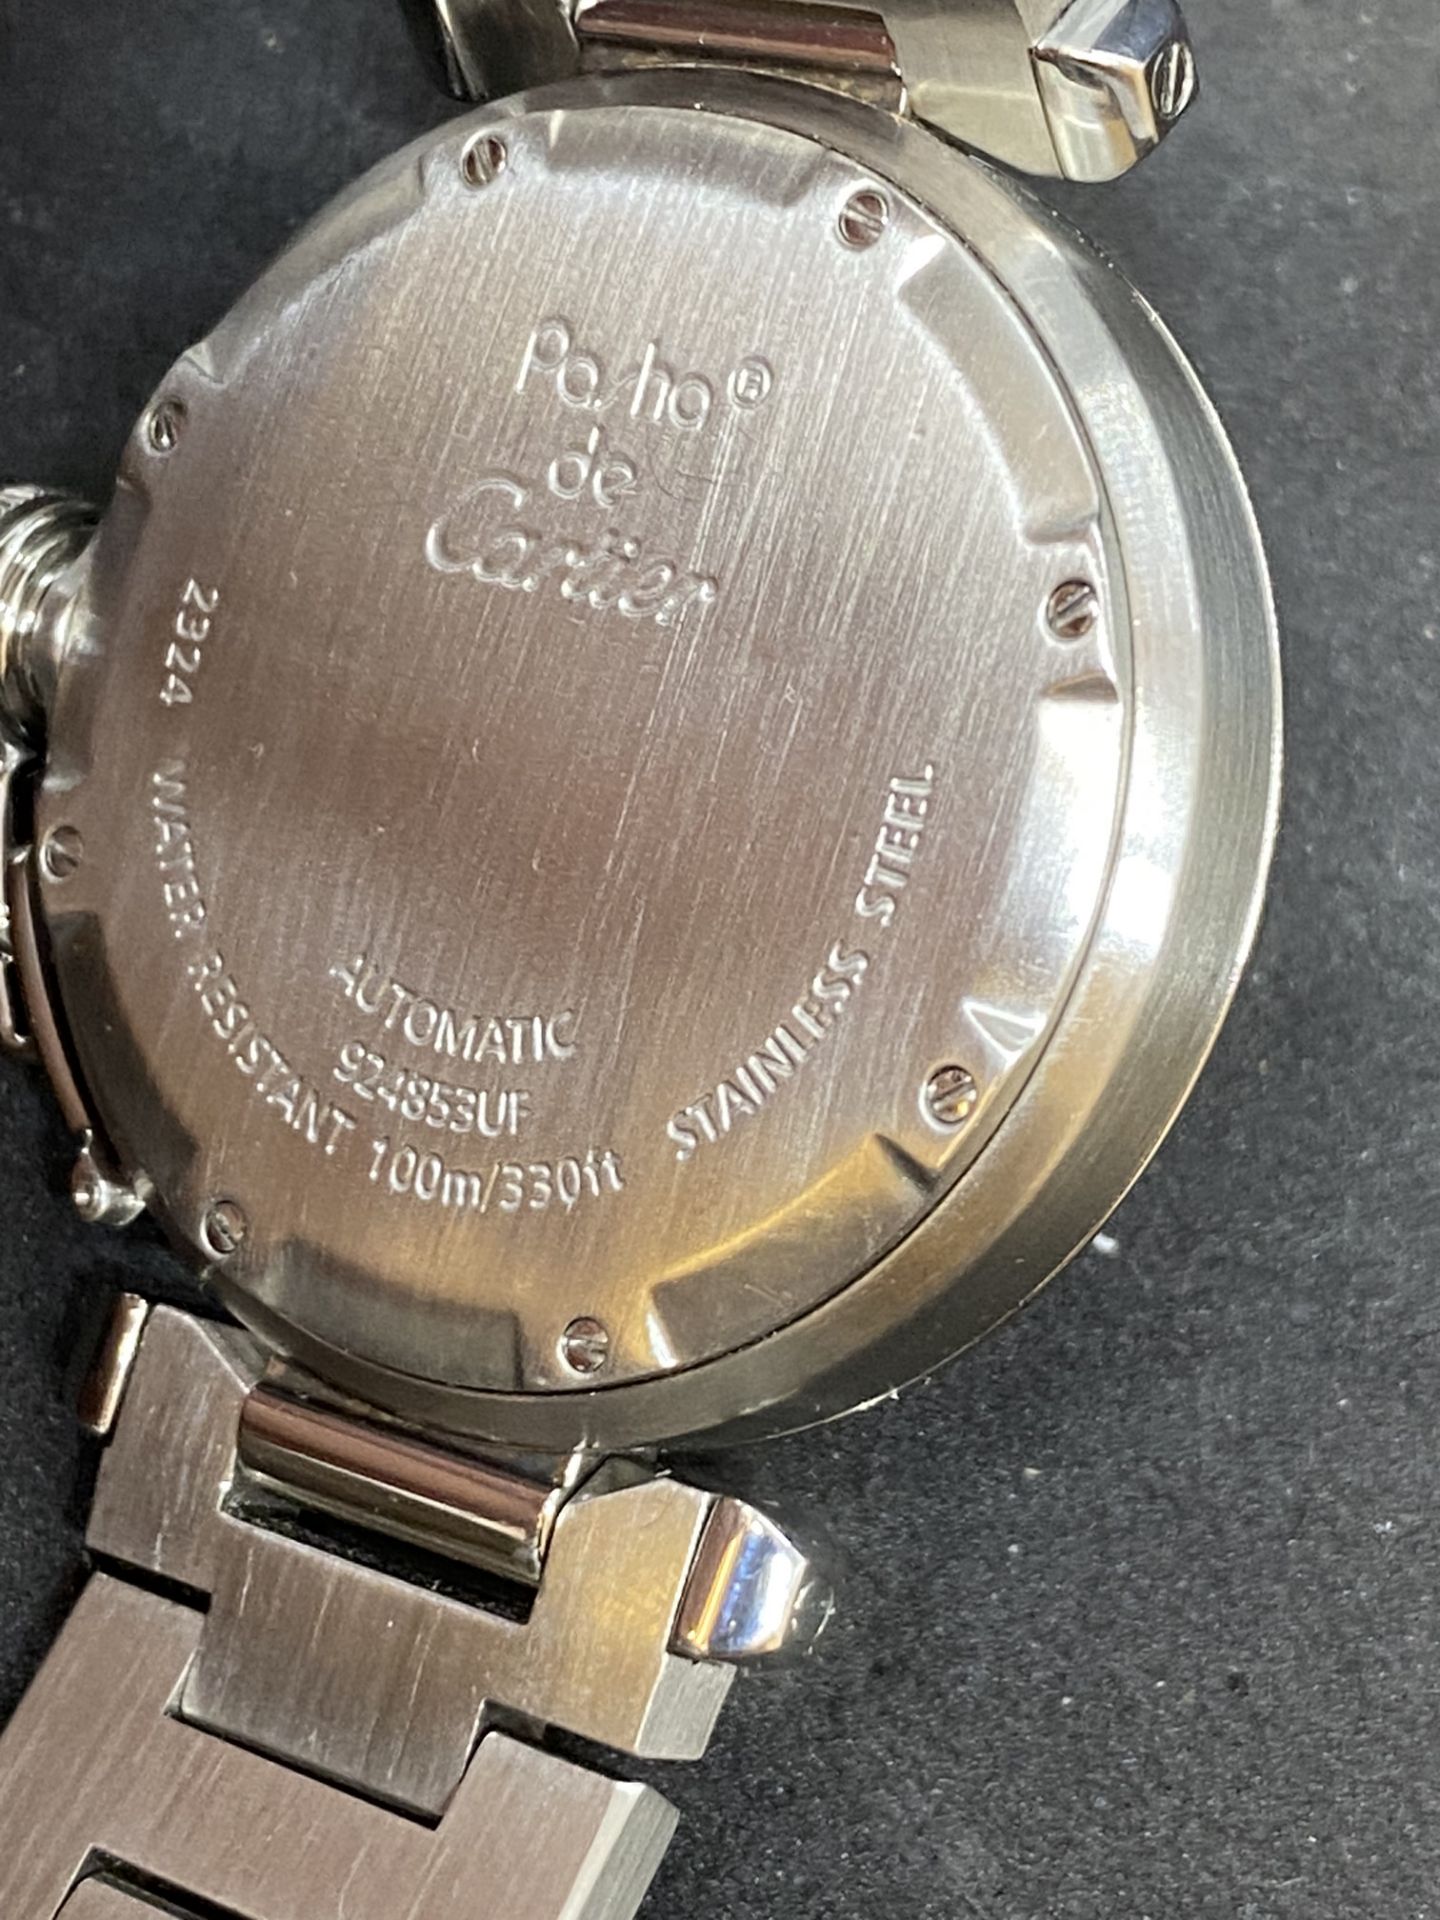 STAINLESS STEEL CARTIER PASHA AUTOMATIC WATCH - Image 8 of 9